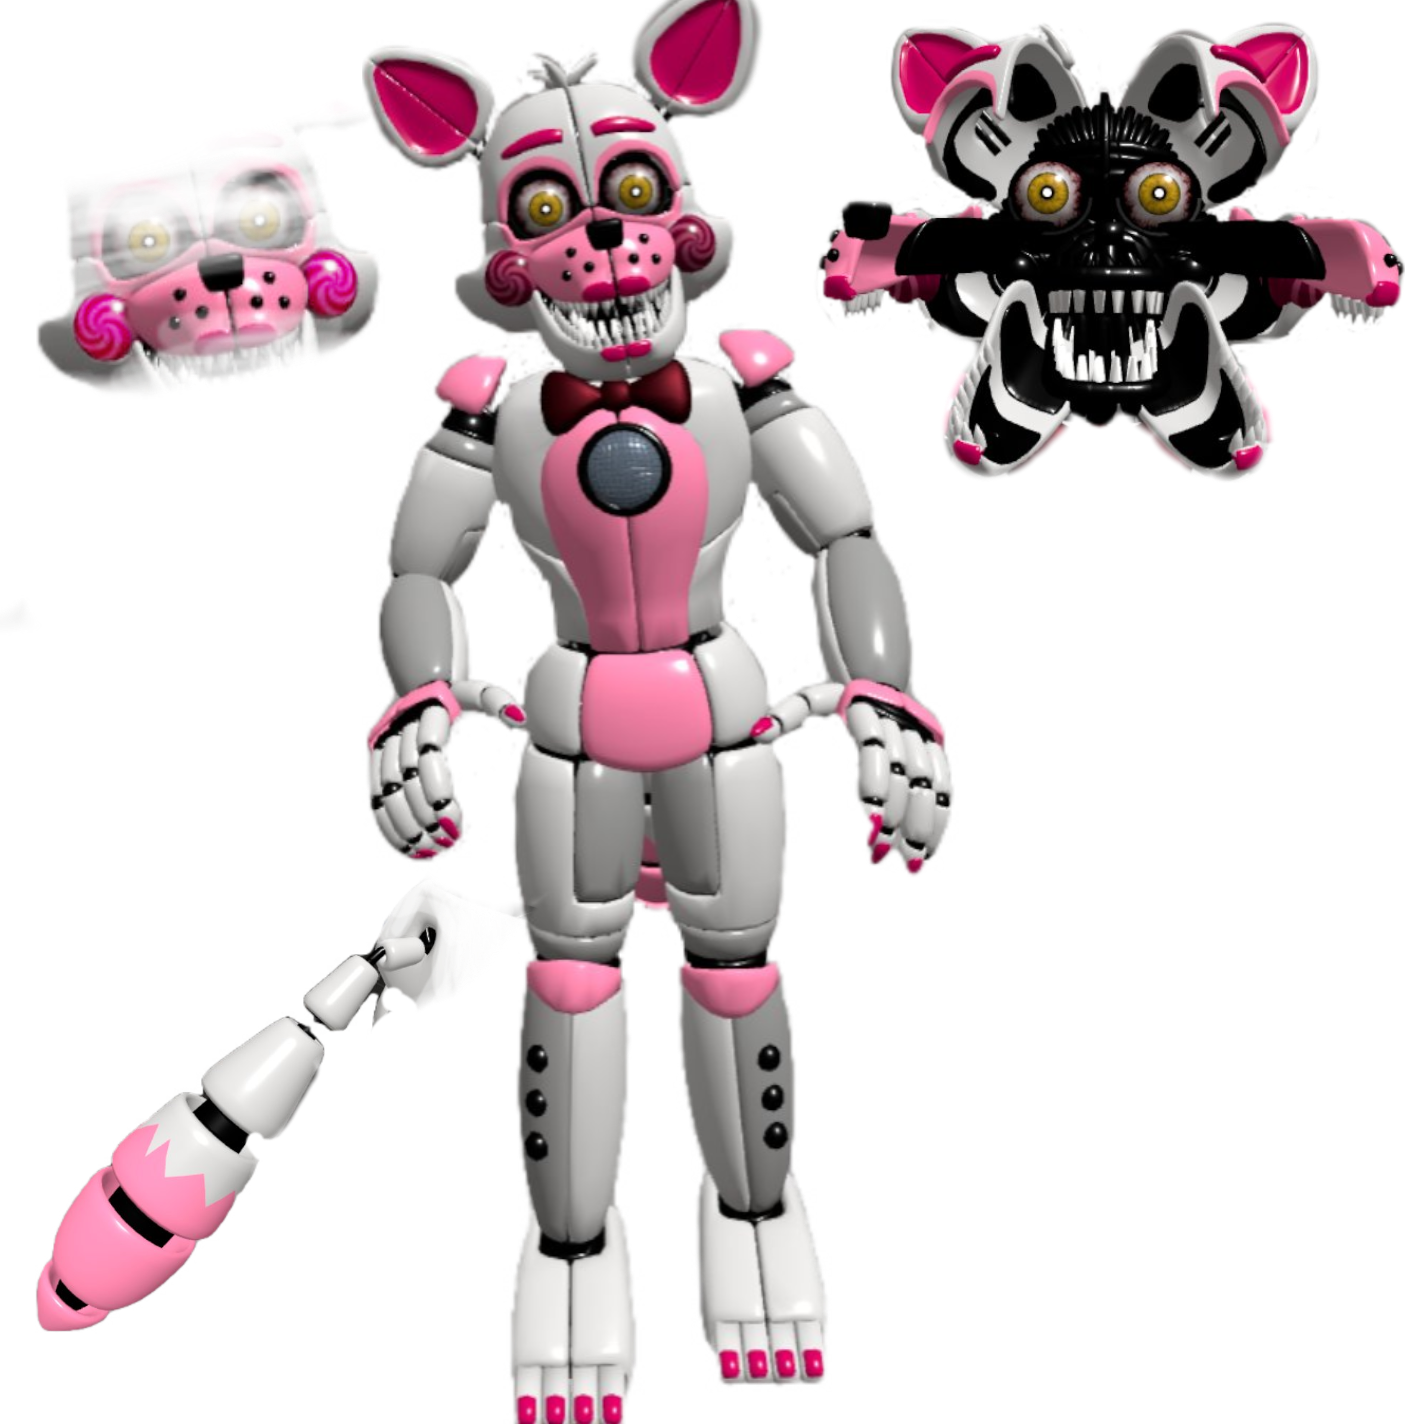 Five Nights at The Sister Location .:Concept:. by Bantranic on DeviantArt